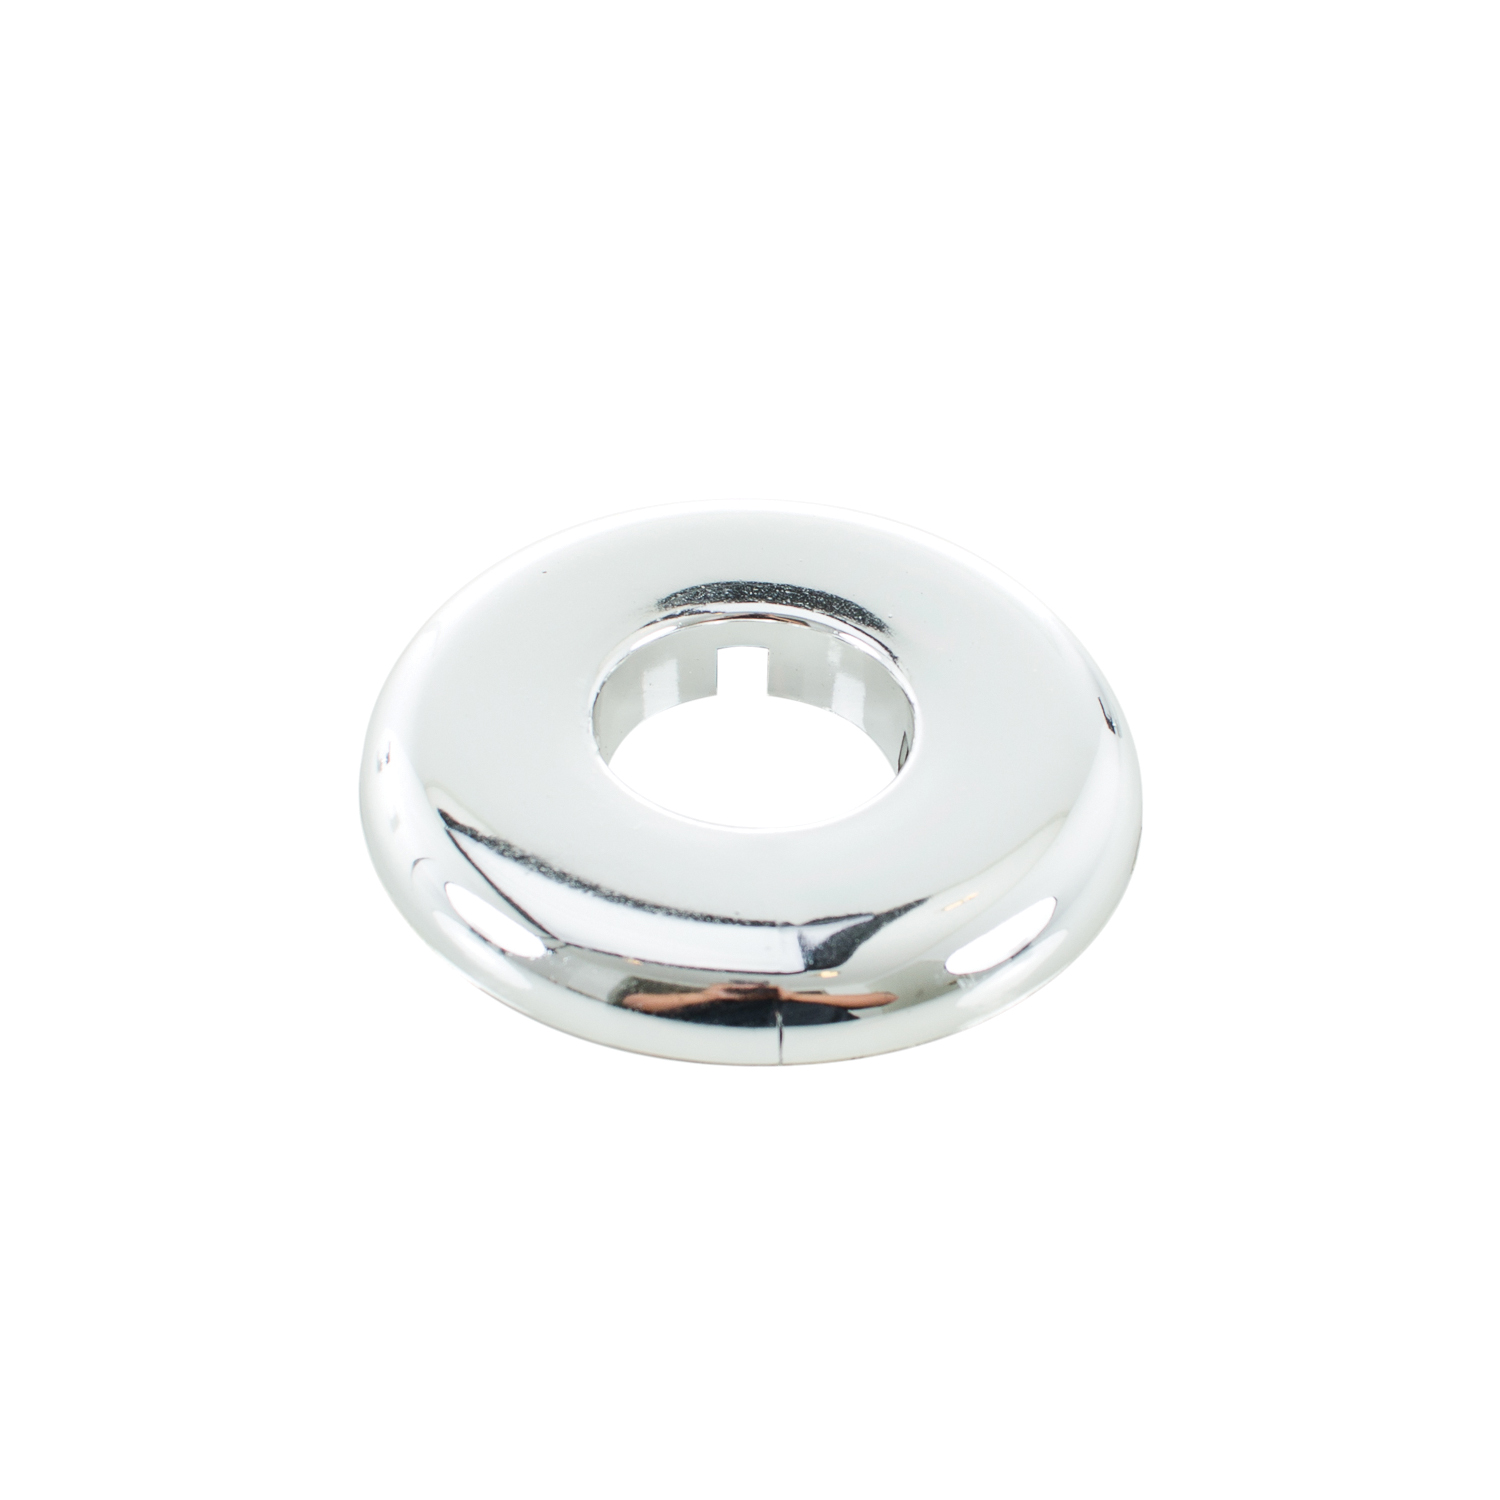 PASCO 2875 Split-One Floor and Ceiling Plate, 1 in CWT Thread, Plastic, Polished Chrome